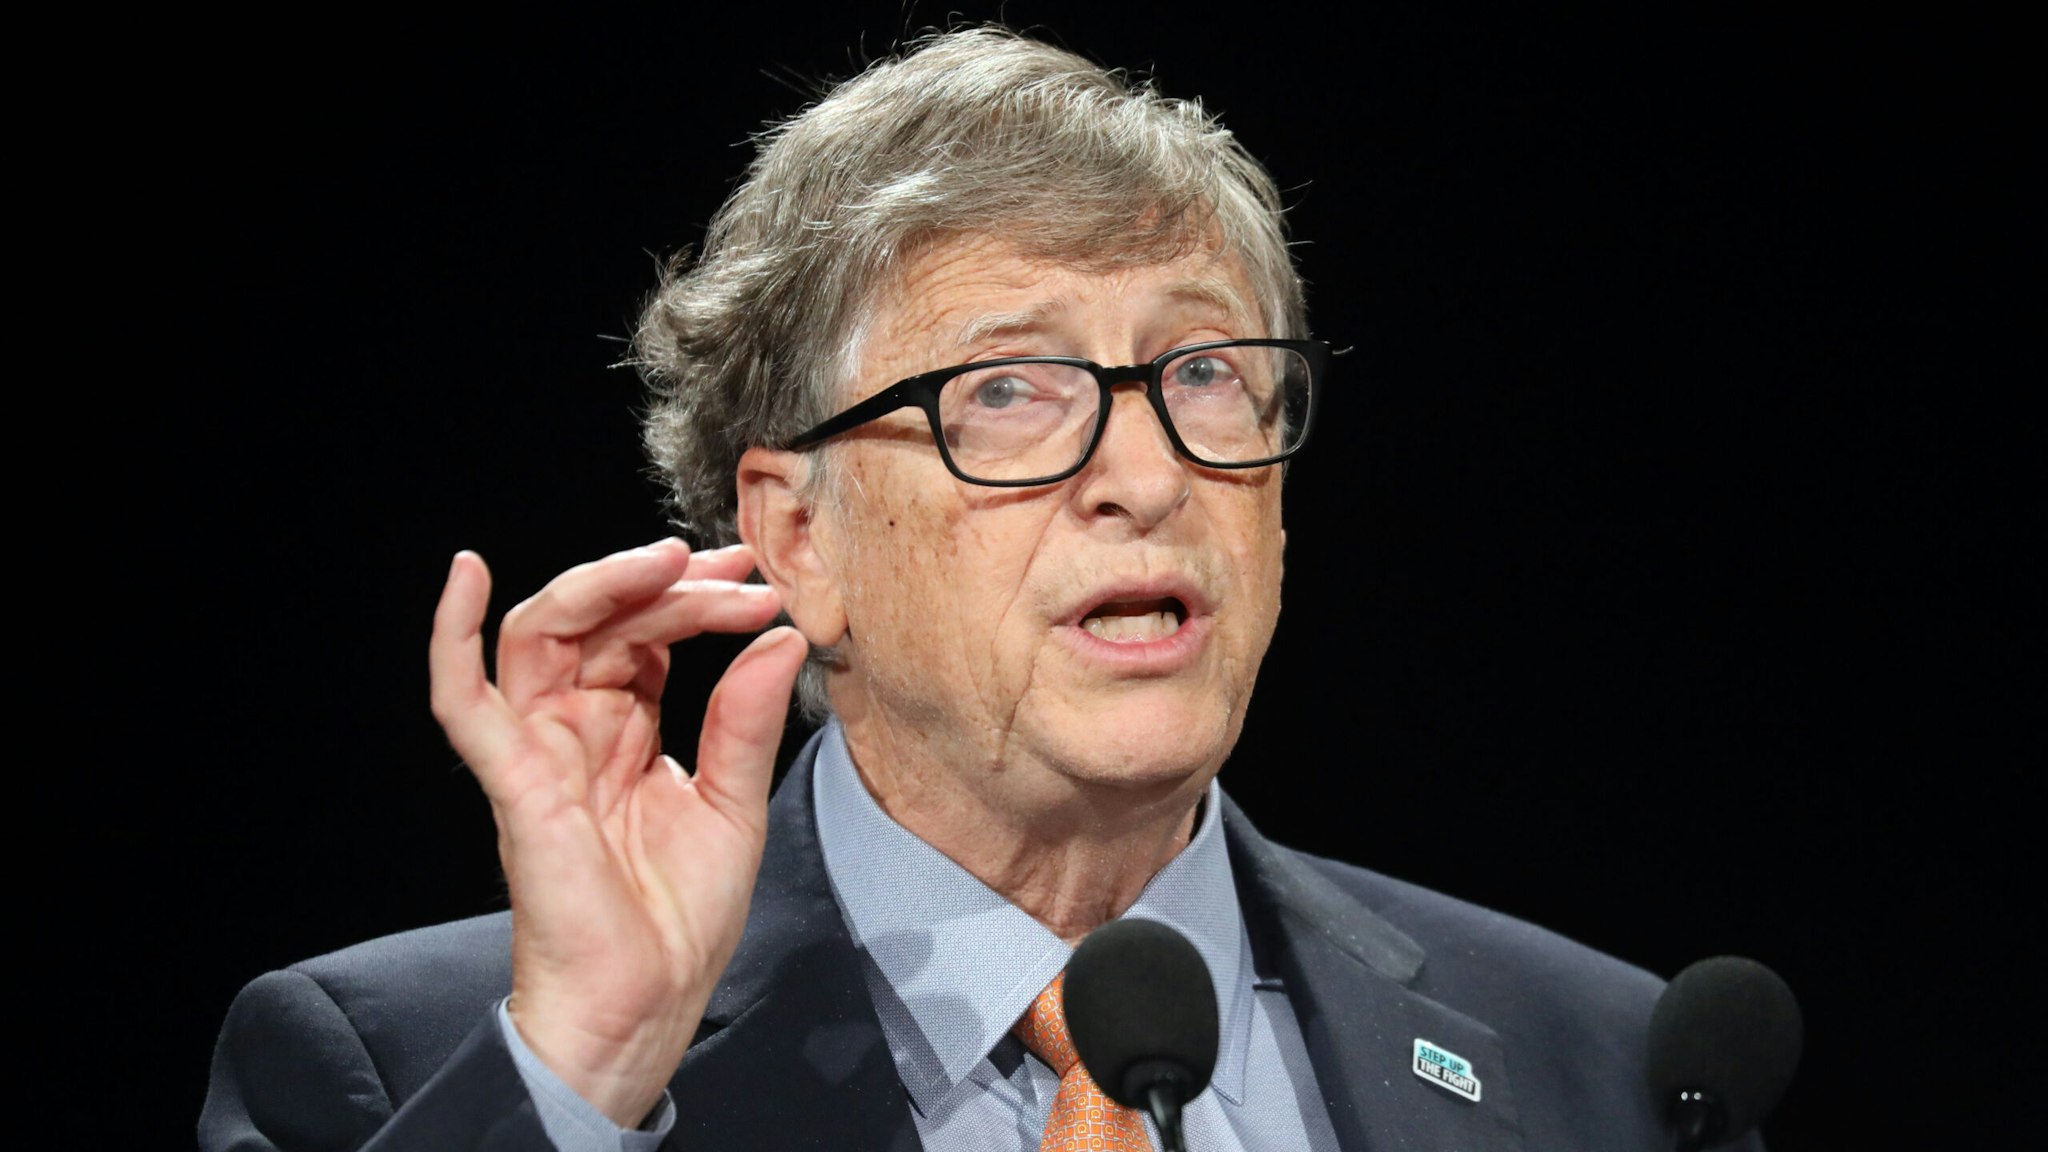 Microsoft founder, Co-Chairman of the Bill &amp; Melinda Gates Foundation, Bill Gates delivers a speech during the conference of Global Fund to Fight HIV, Tuberculosis and Malaria on october 10, 2019, in Lyon, central eastern France. - The Global Fund to Fight AIDS, Tuberculosis and Malaria opened a drive to raise $14 billion to fight a global epidemics but face an uphill battle in the face of donor fatigue.